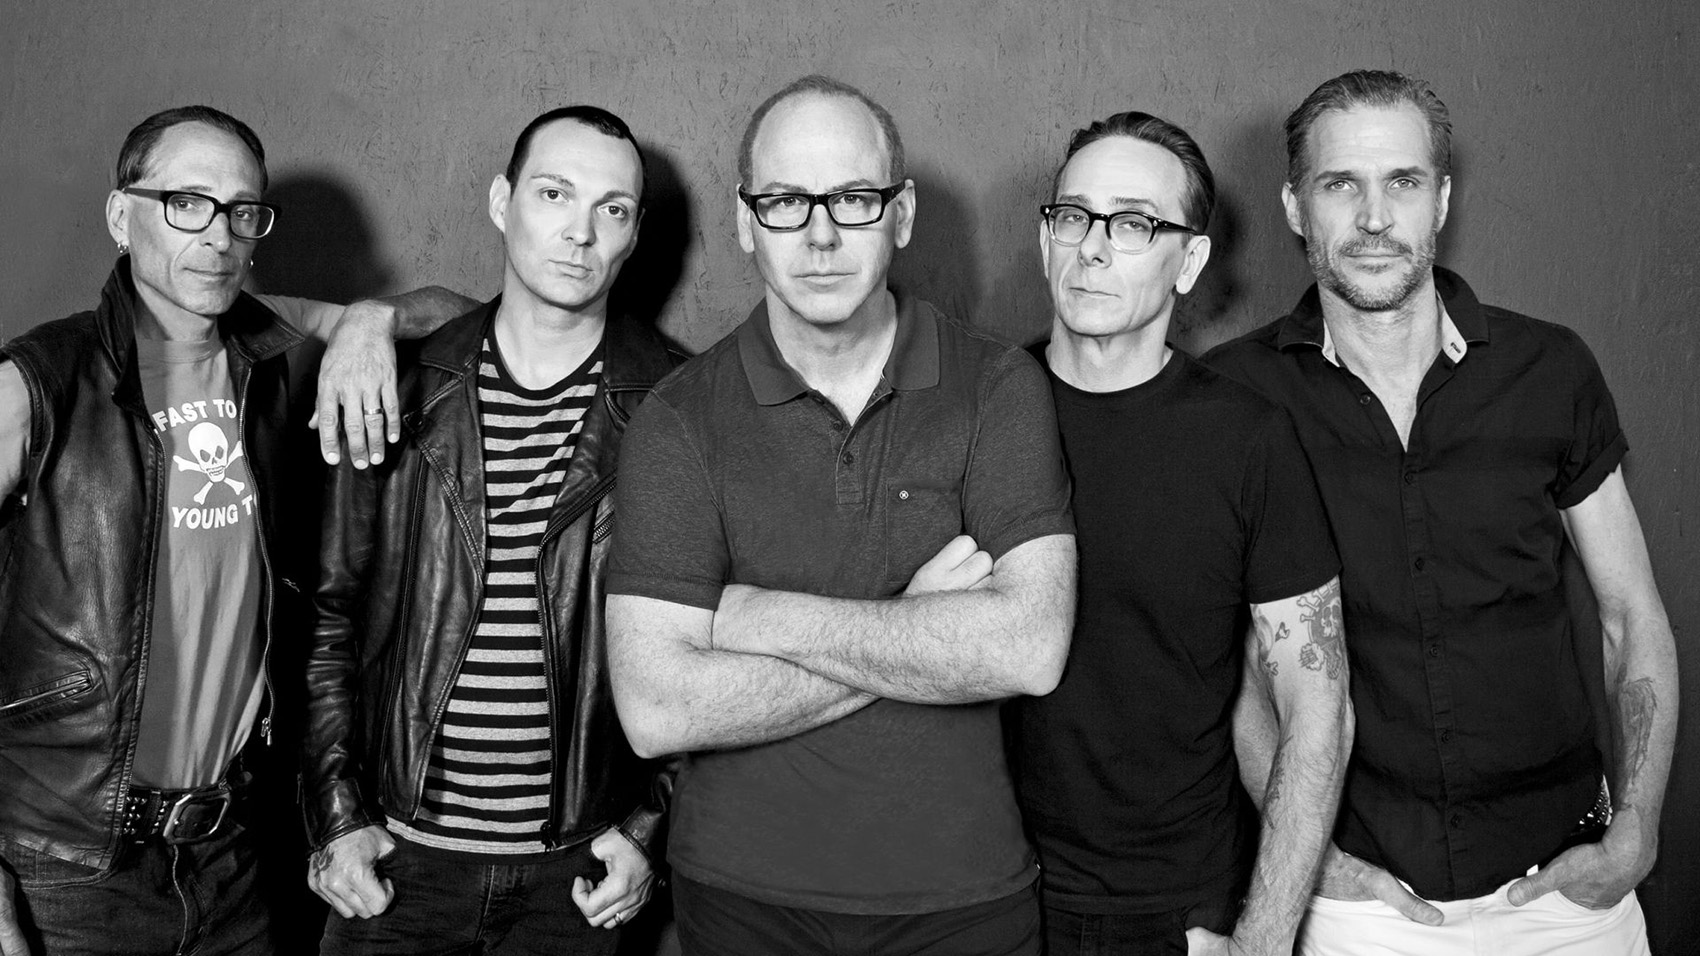 Bad Religion - March 2016 - Photograph by Lisa Johnson Rock Photographer. ALL RIGHTS RESERVED. http://www.lisajohnsonphoto.com